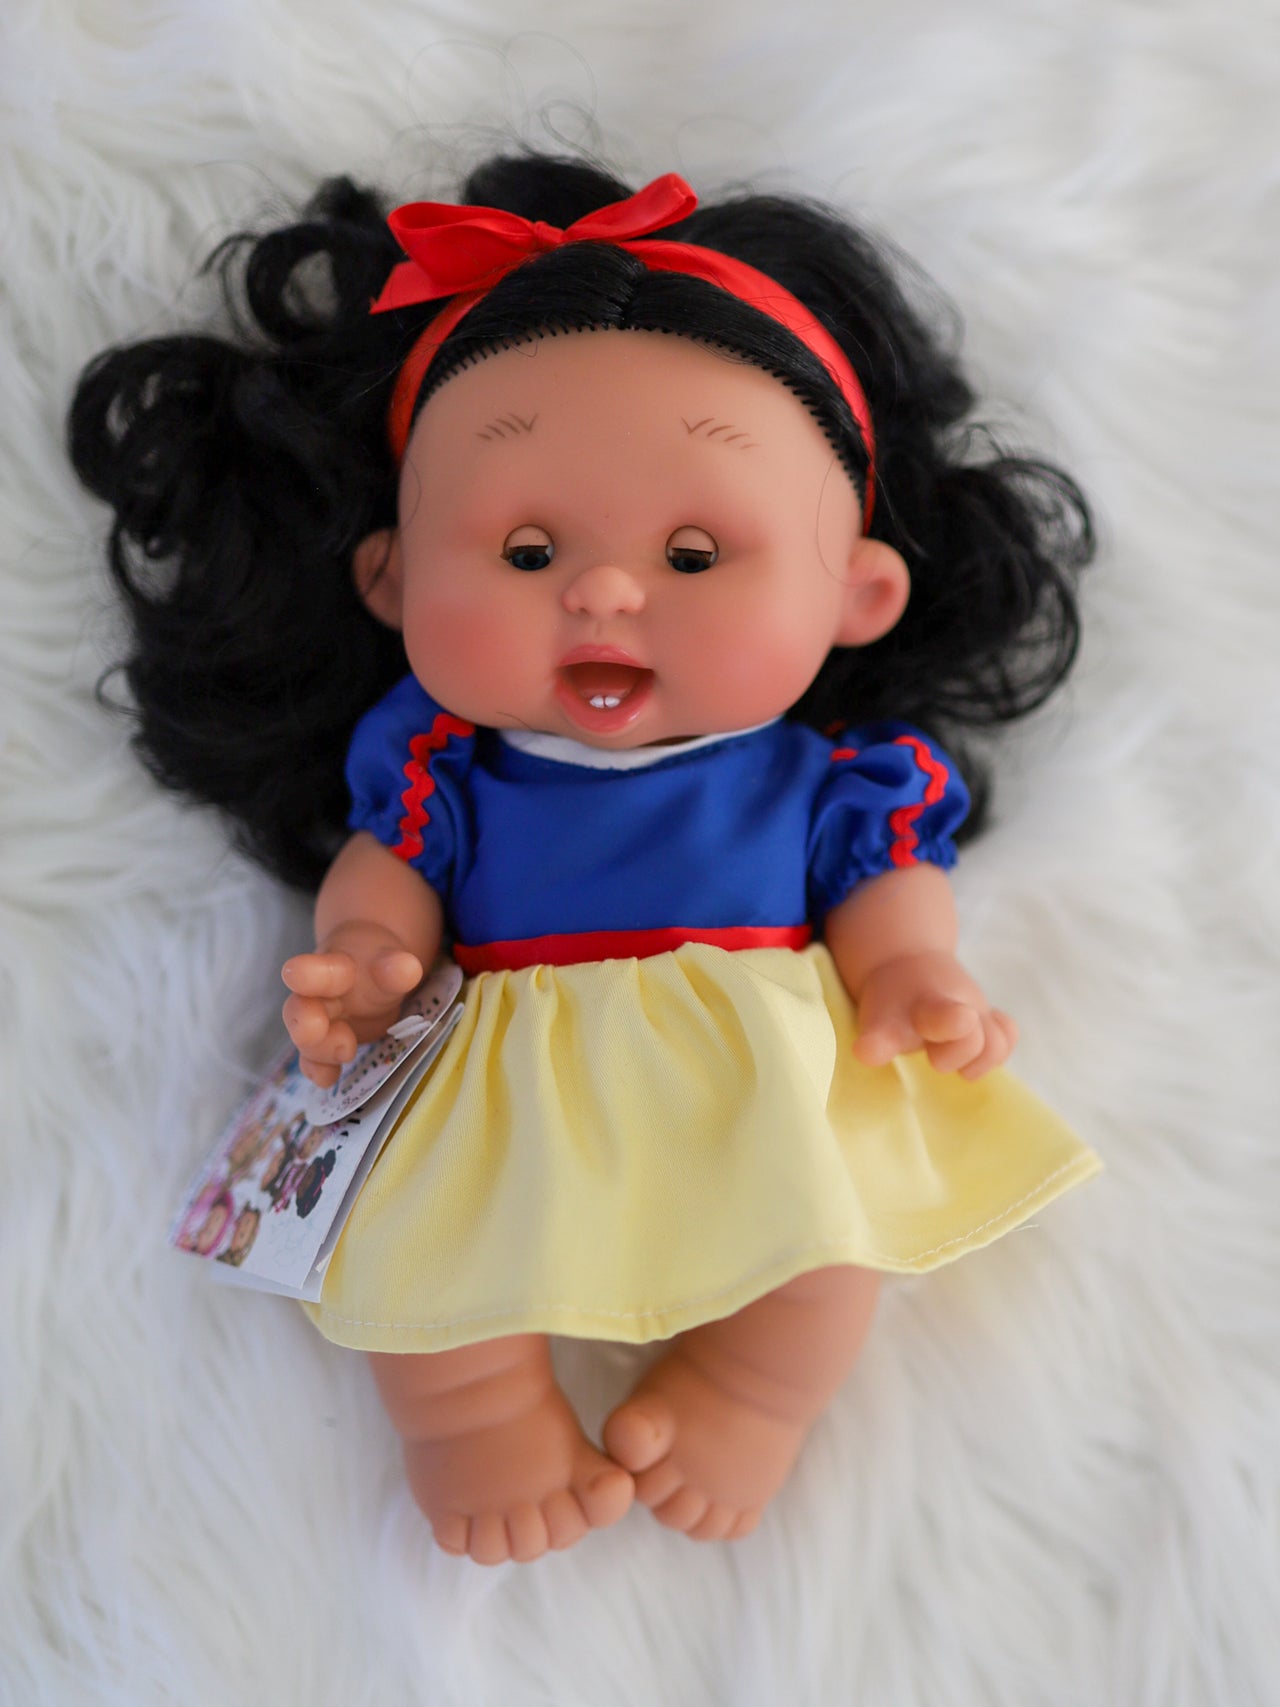 Snow White - Fairy Tale Pepotes Doll with Sleepy Eyes